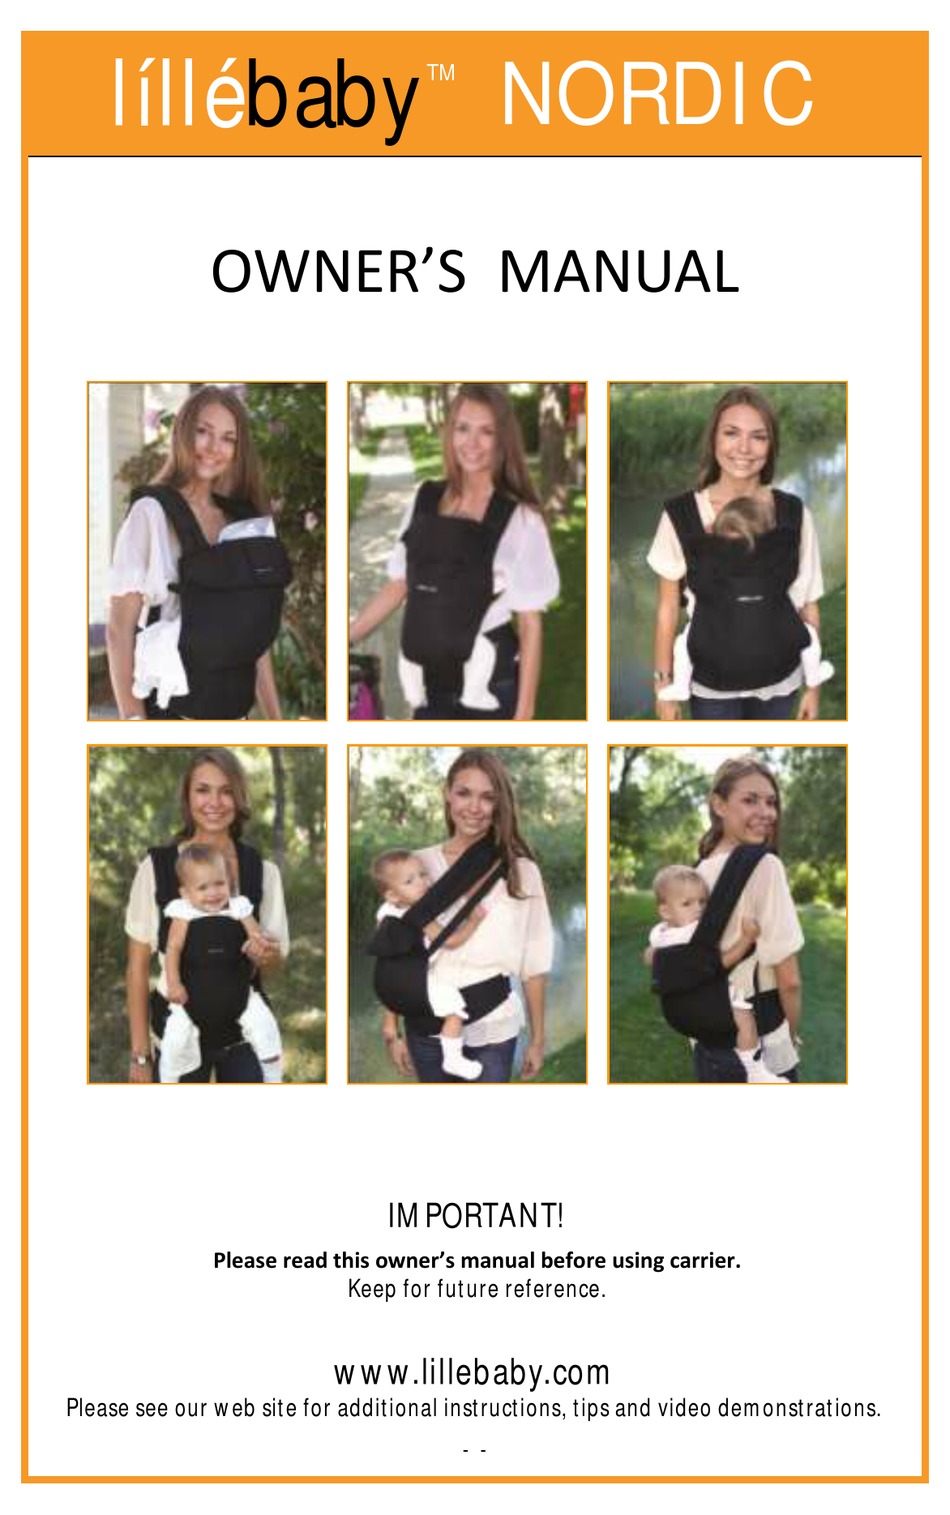 lillebaby carrier instructions